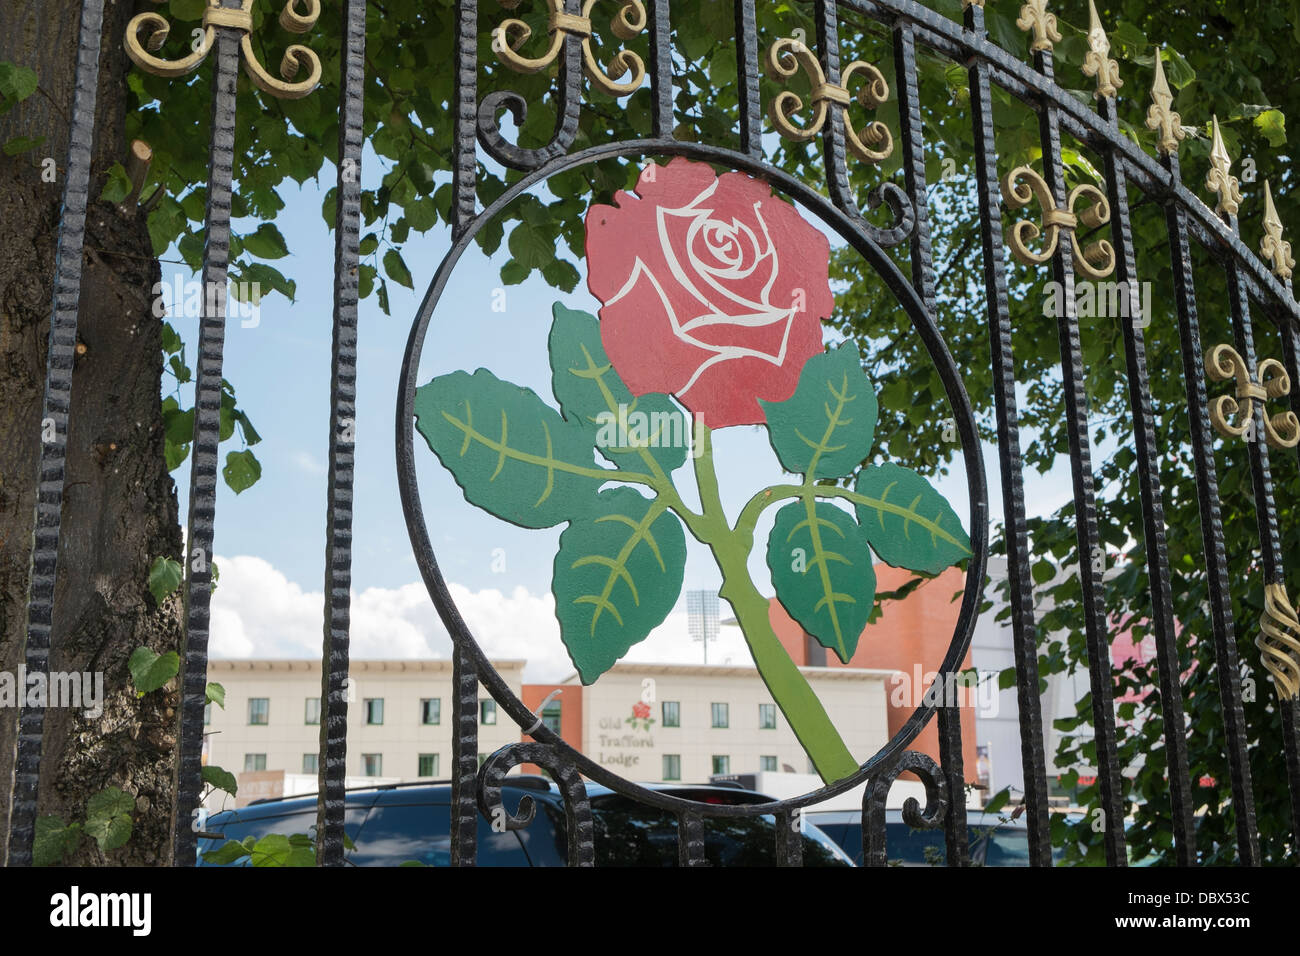 Red Rose symbol on iron railings around Emirates Old Trafford at Lancashire County Cricket Ground in Manchester England UK Stock Photo